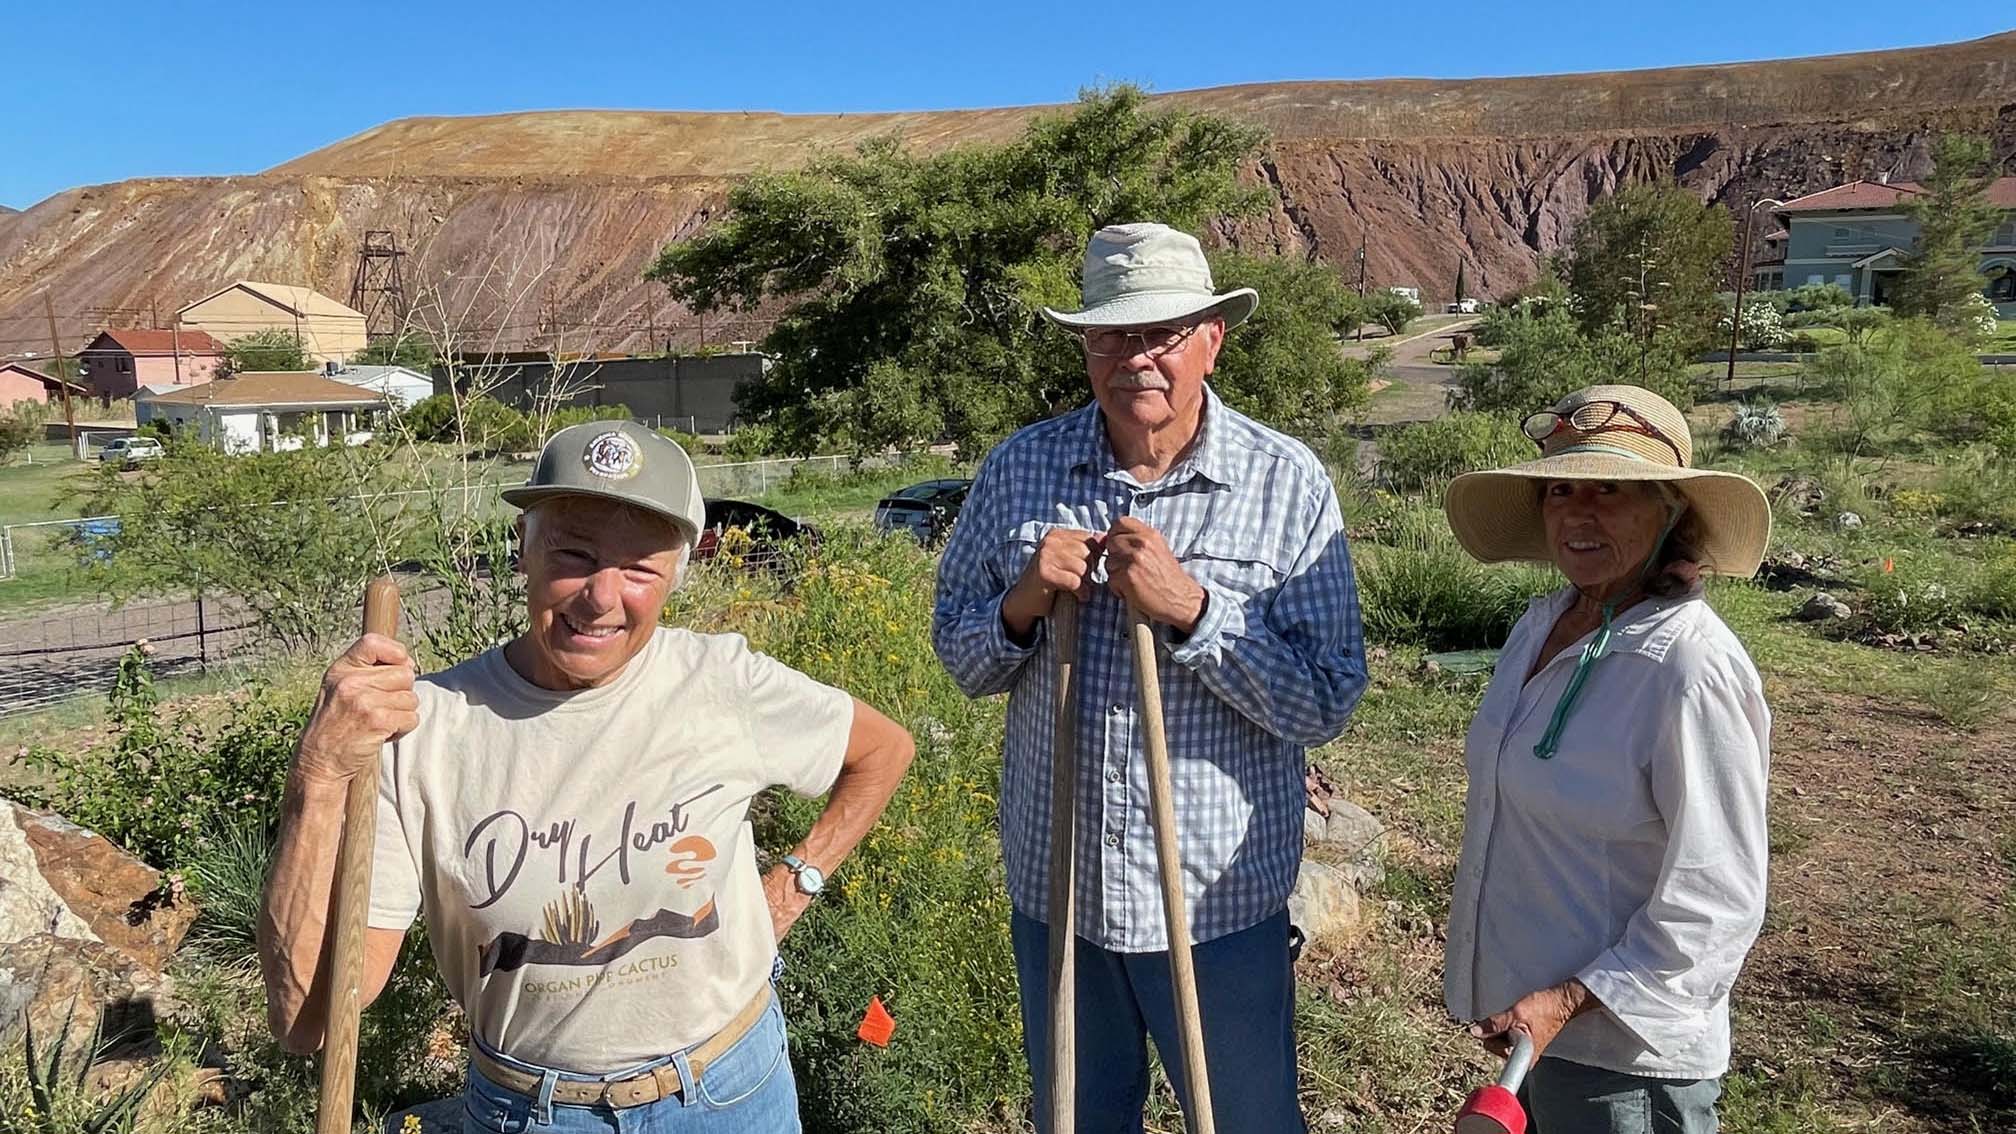 Jane Gaffer, Doug Danforth and Carmen Faucon are core members of Project Bisbee: Wildlife and have put in countless hours to get Bisbee certified as a community wildlife habitat by the National Wildlife Federation.  However, the trio credits city residents and many others for their cooperation and participation. 